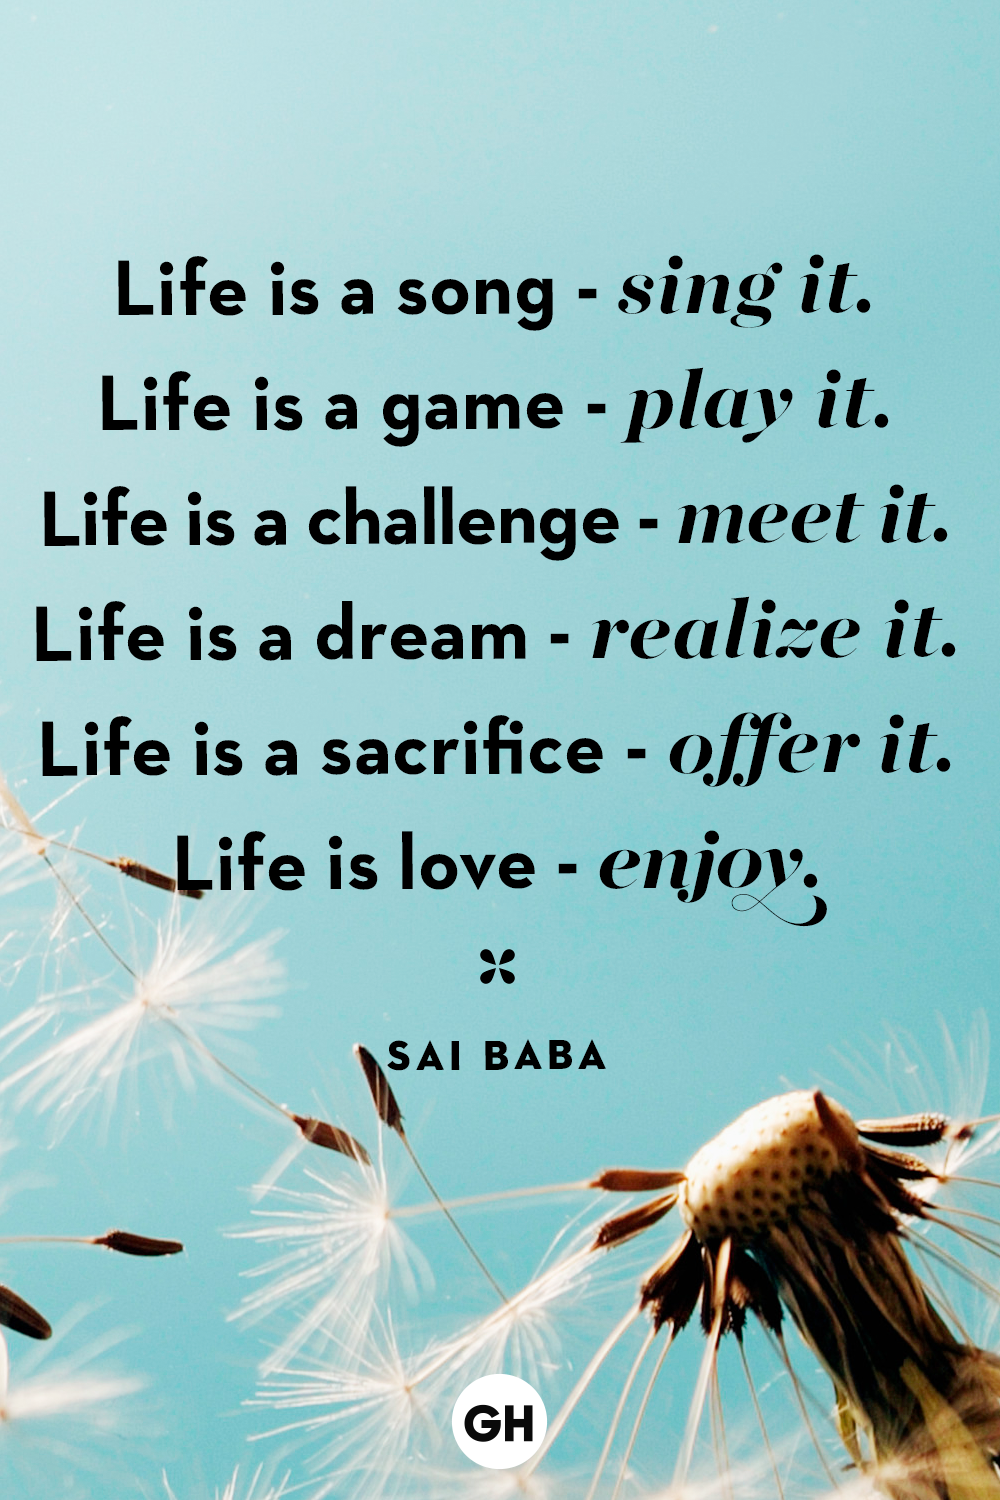 https://hips.hearstapps.com/hmg-prod/images/life-quotes-sai-baba-1665419808.png